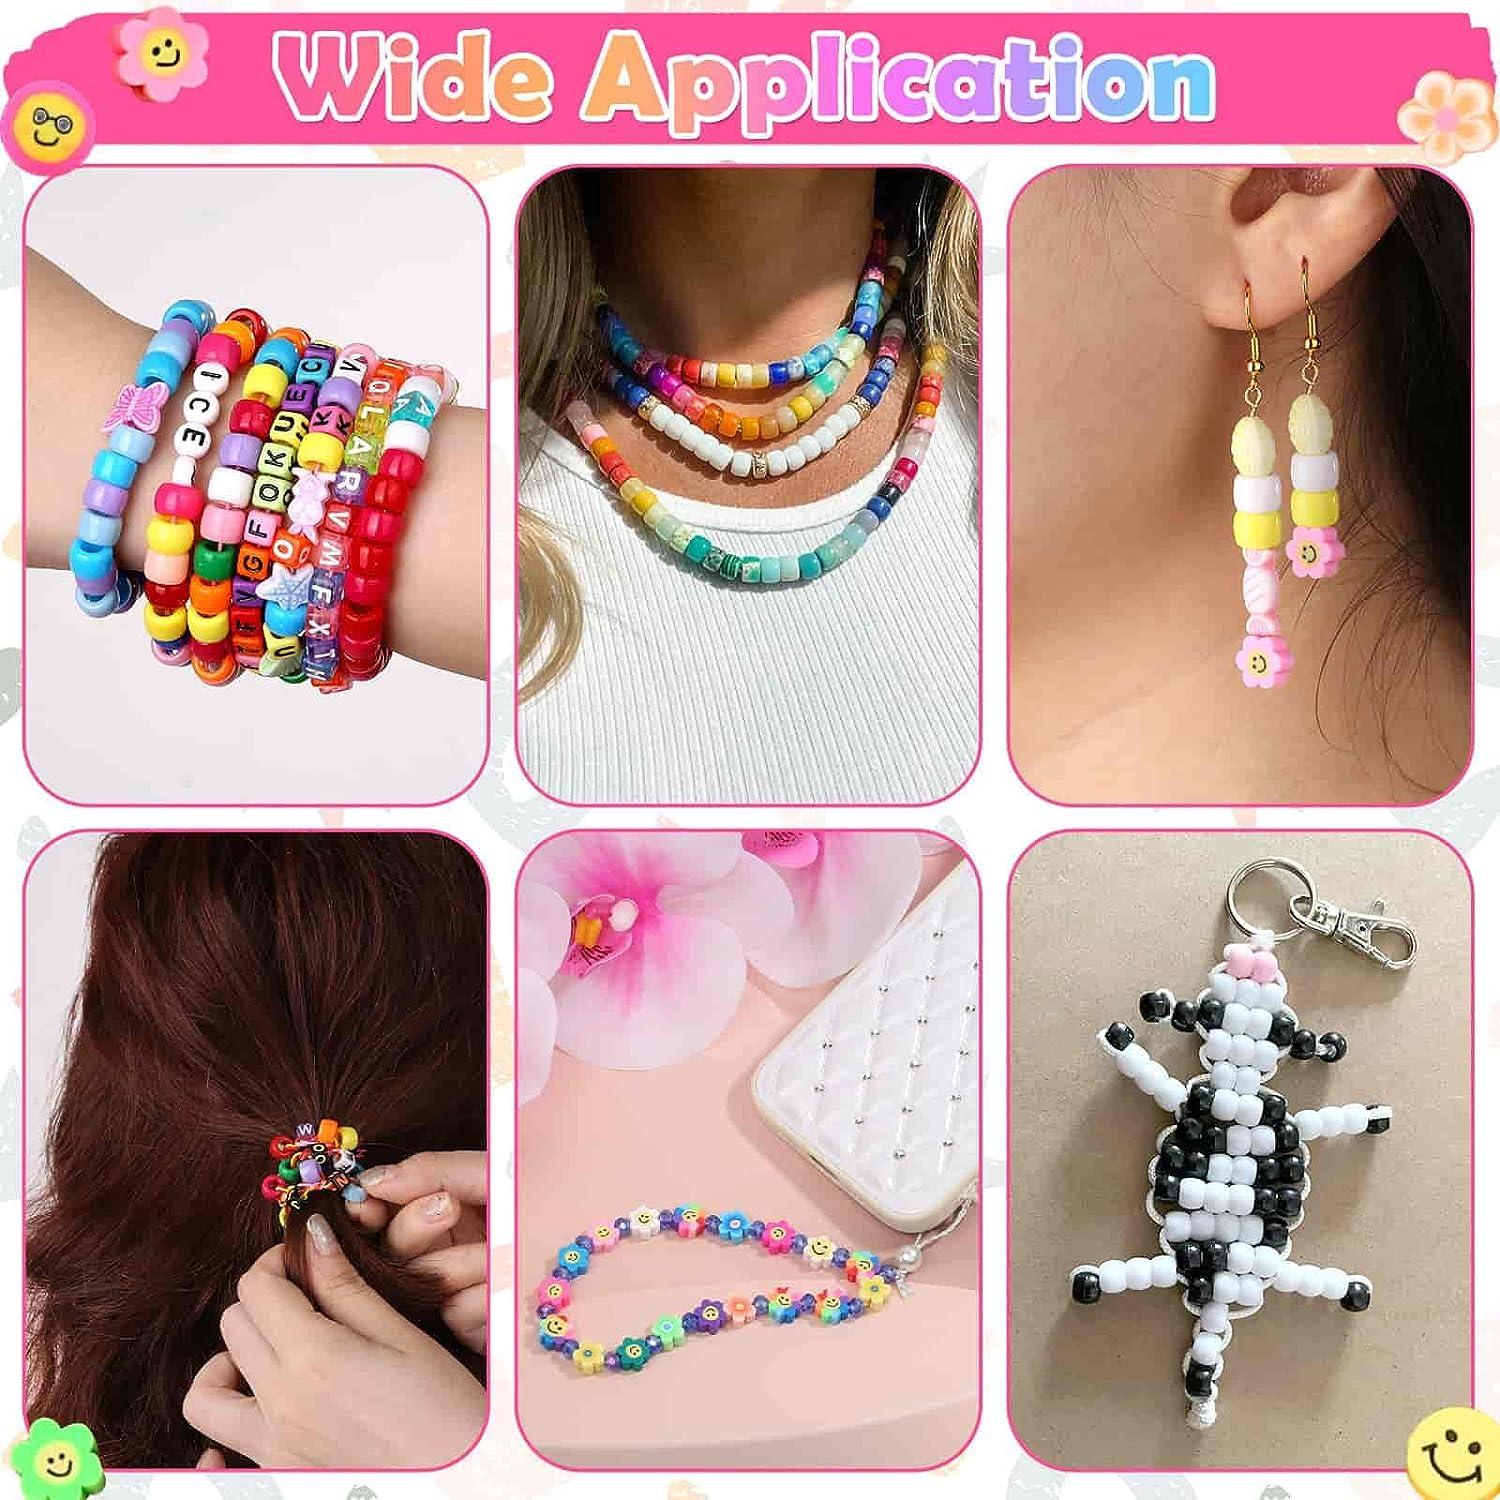 Cridoz Bead Bracelet Making Kit with Pony Beads Polymer Fruit Clay Beads  Smile Face Charm/ Letter Beads for Friendship Bracelets and Jewelry Making  850